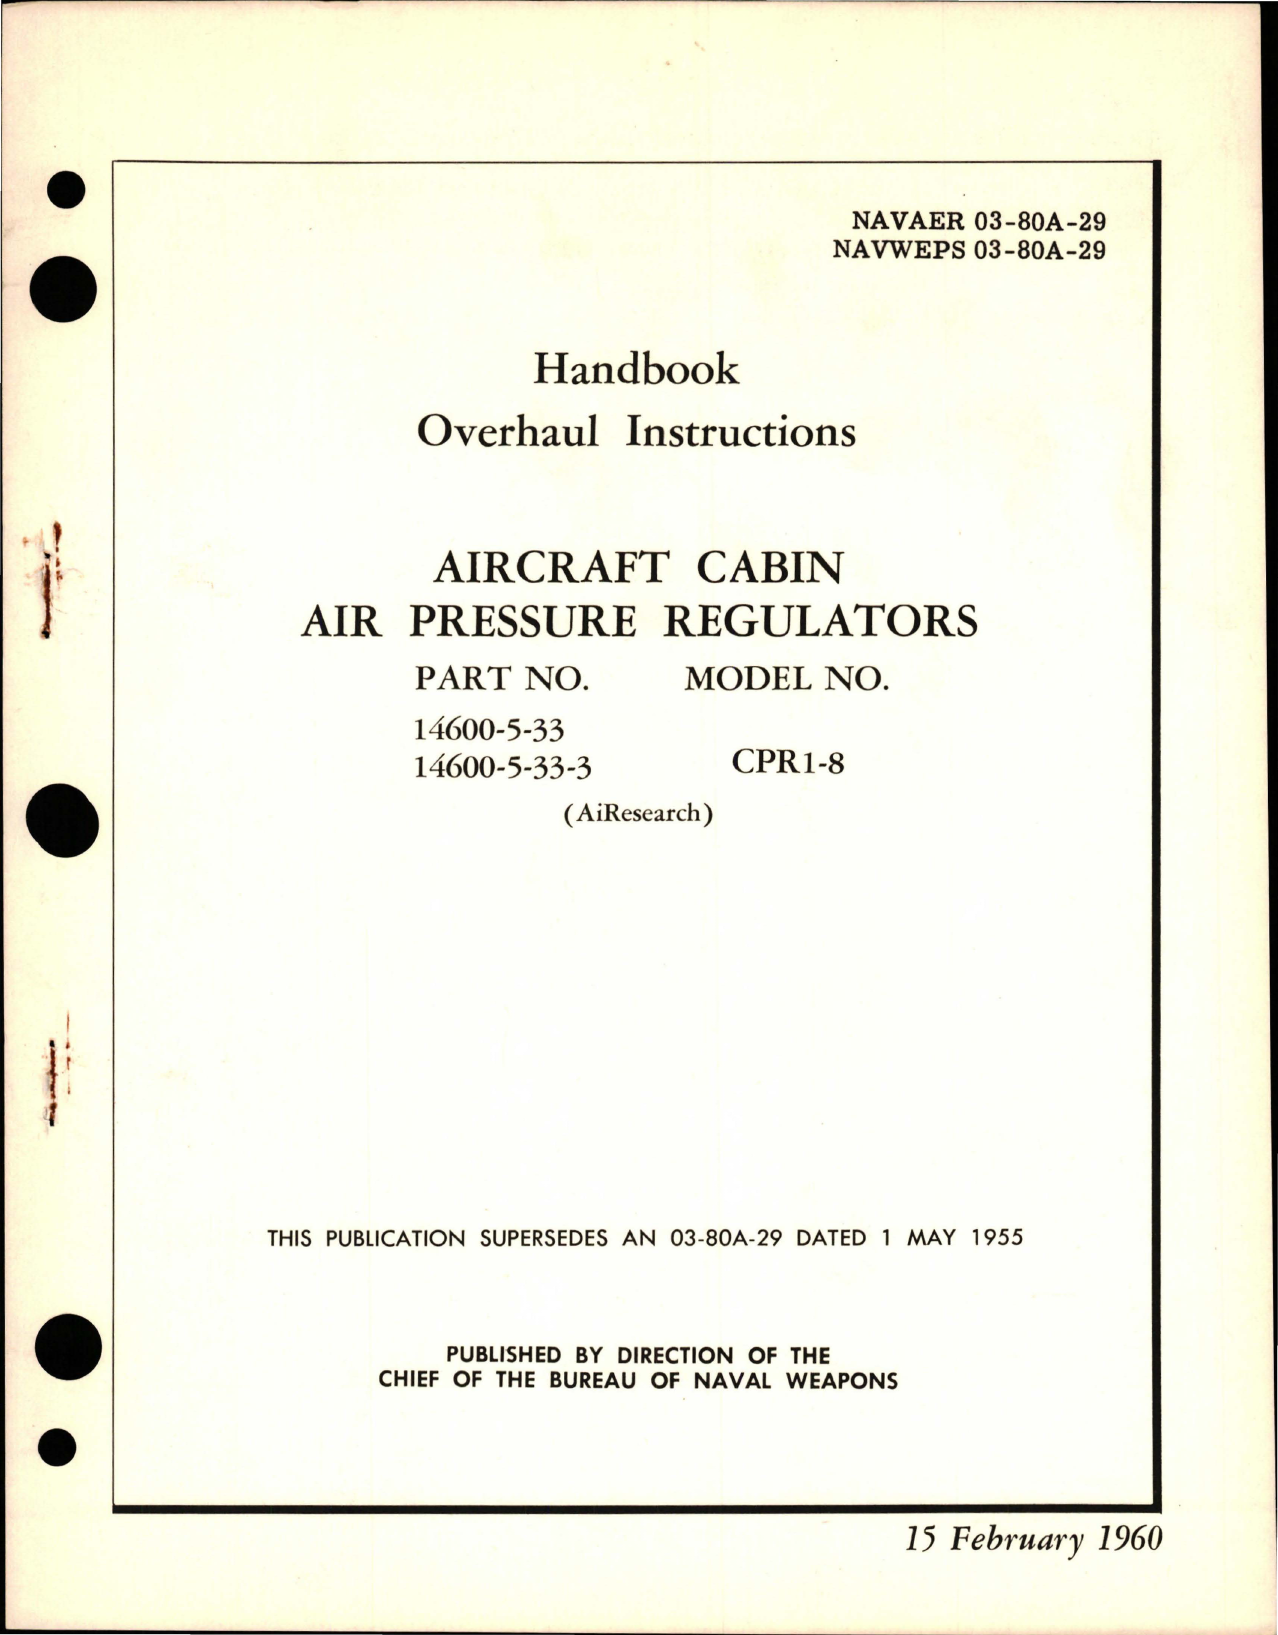 Sample page 1 from AirCorps Library document: Overhaul Instructions for Aircraft Cabin Air Pressure Regulators - Parts 14600-5-33 and 14600-5-33-3 - Model CPR1-8